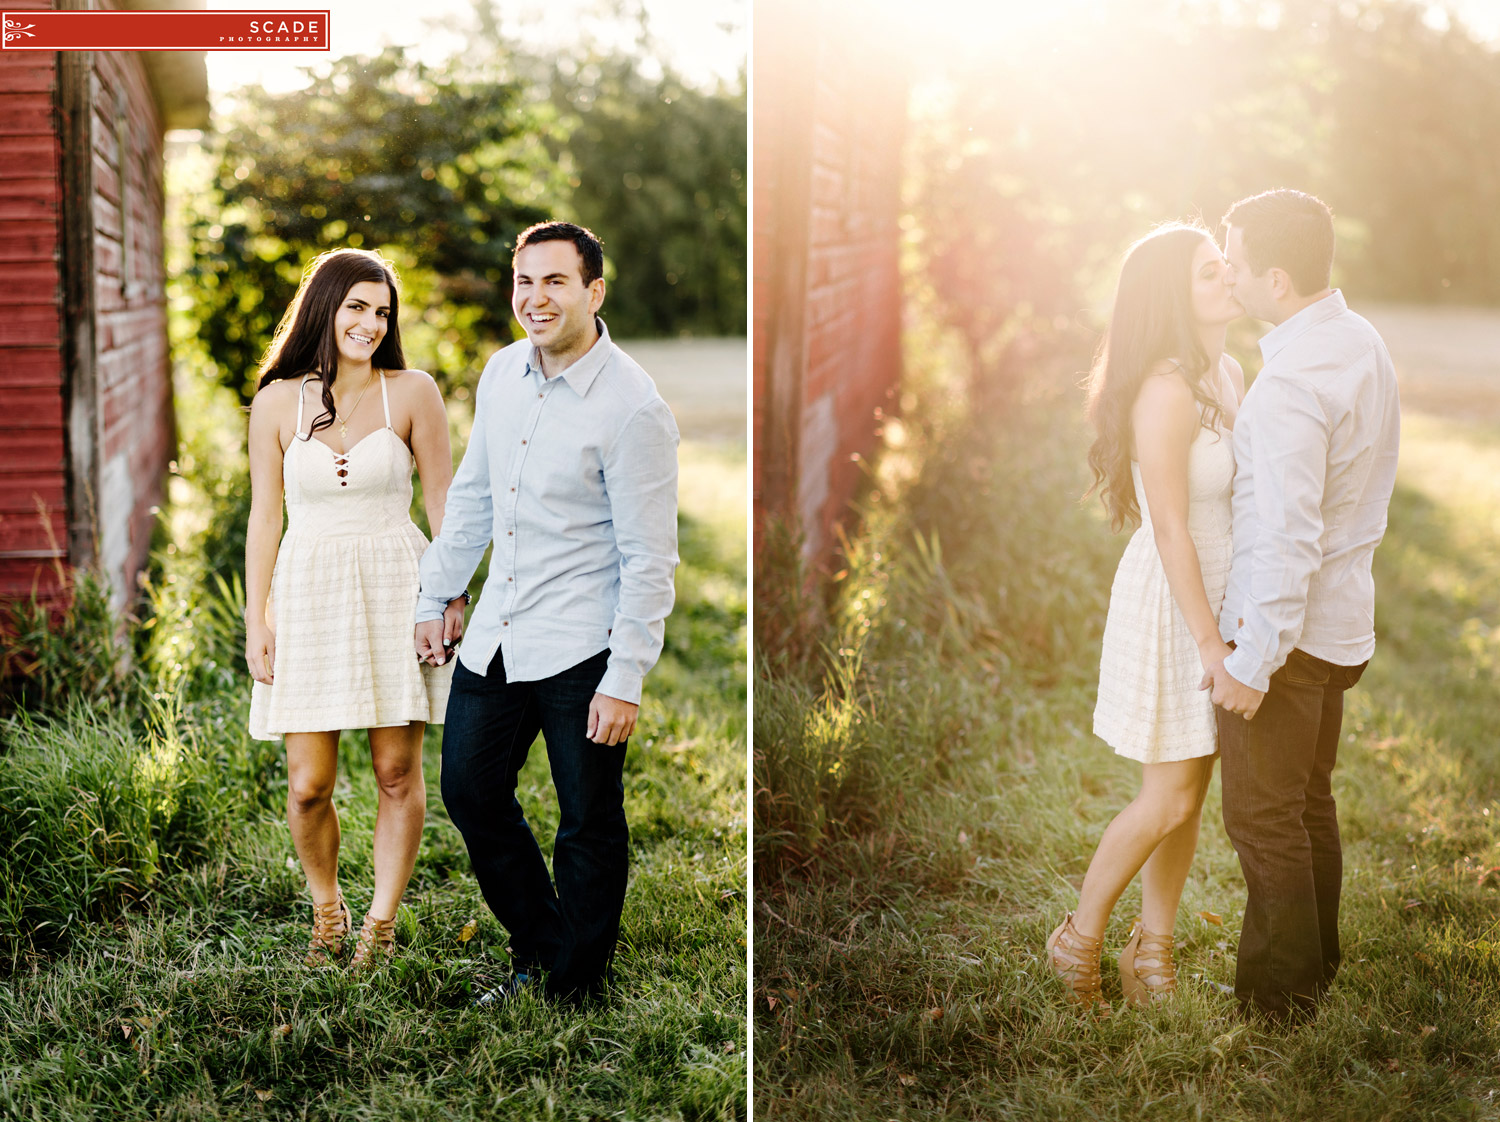 Fall Engagement Session - Laura and Anthony0003.JPG